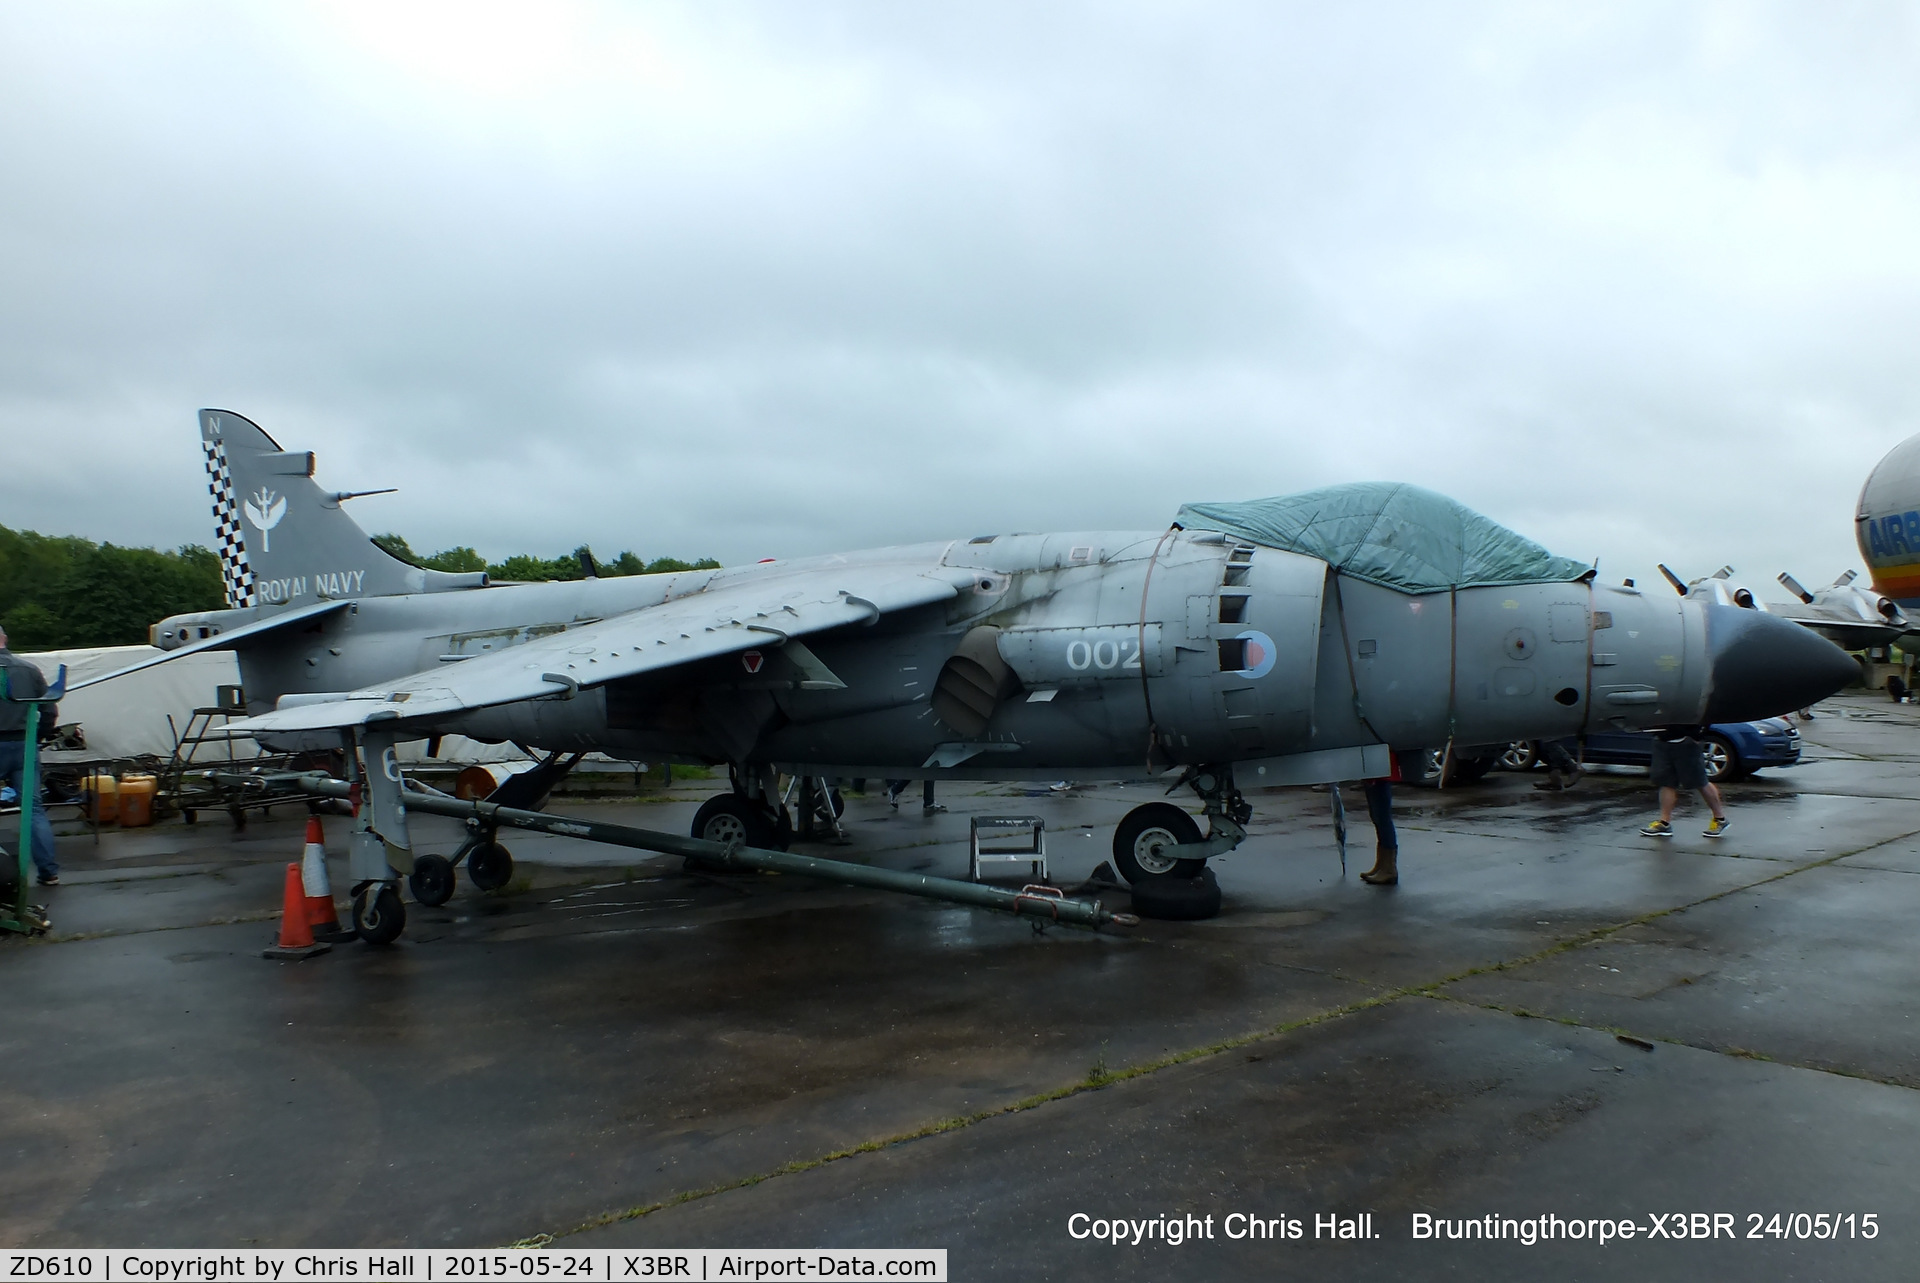 ZD610, 1985 British Aerospace Sea Harrier F/A.2 C/N 1H-912049/B43/P27, at the Cold War Jets Open Day 2015